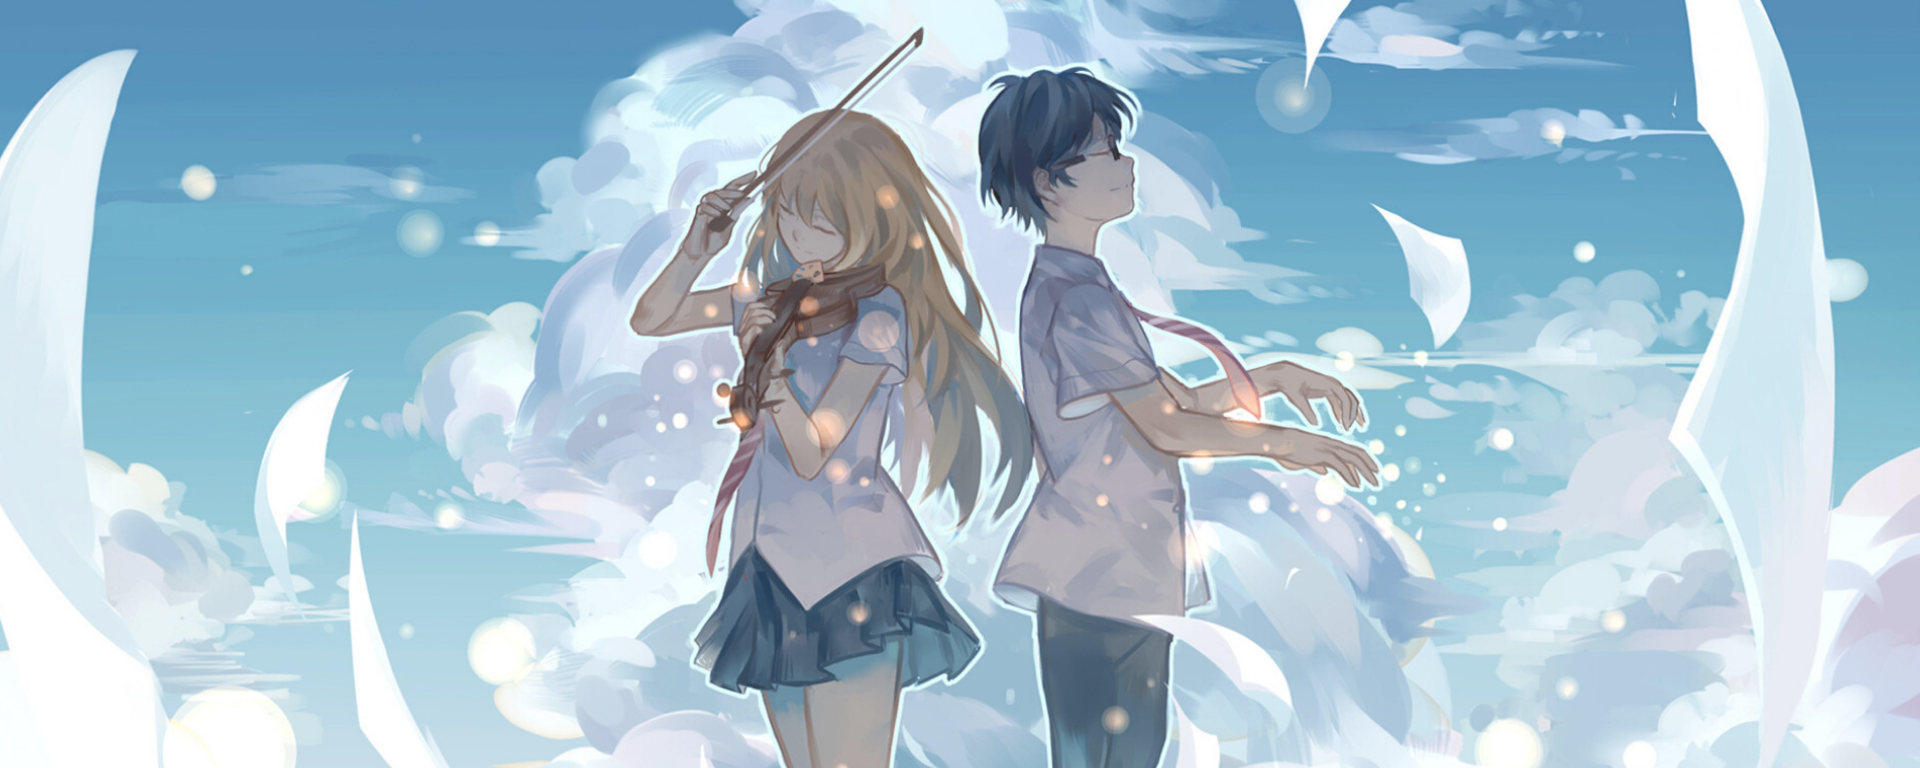 Your Lie In April anime